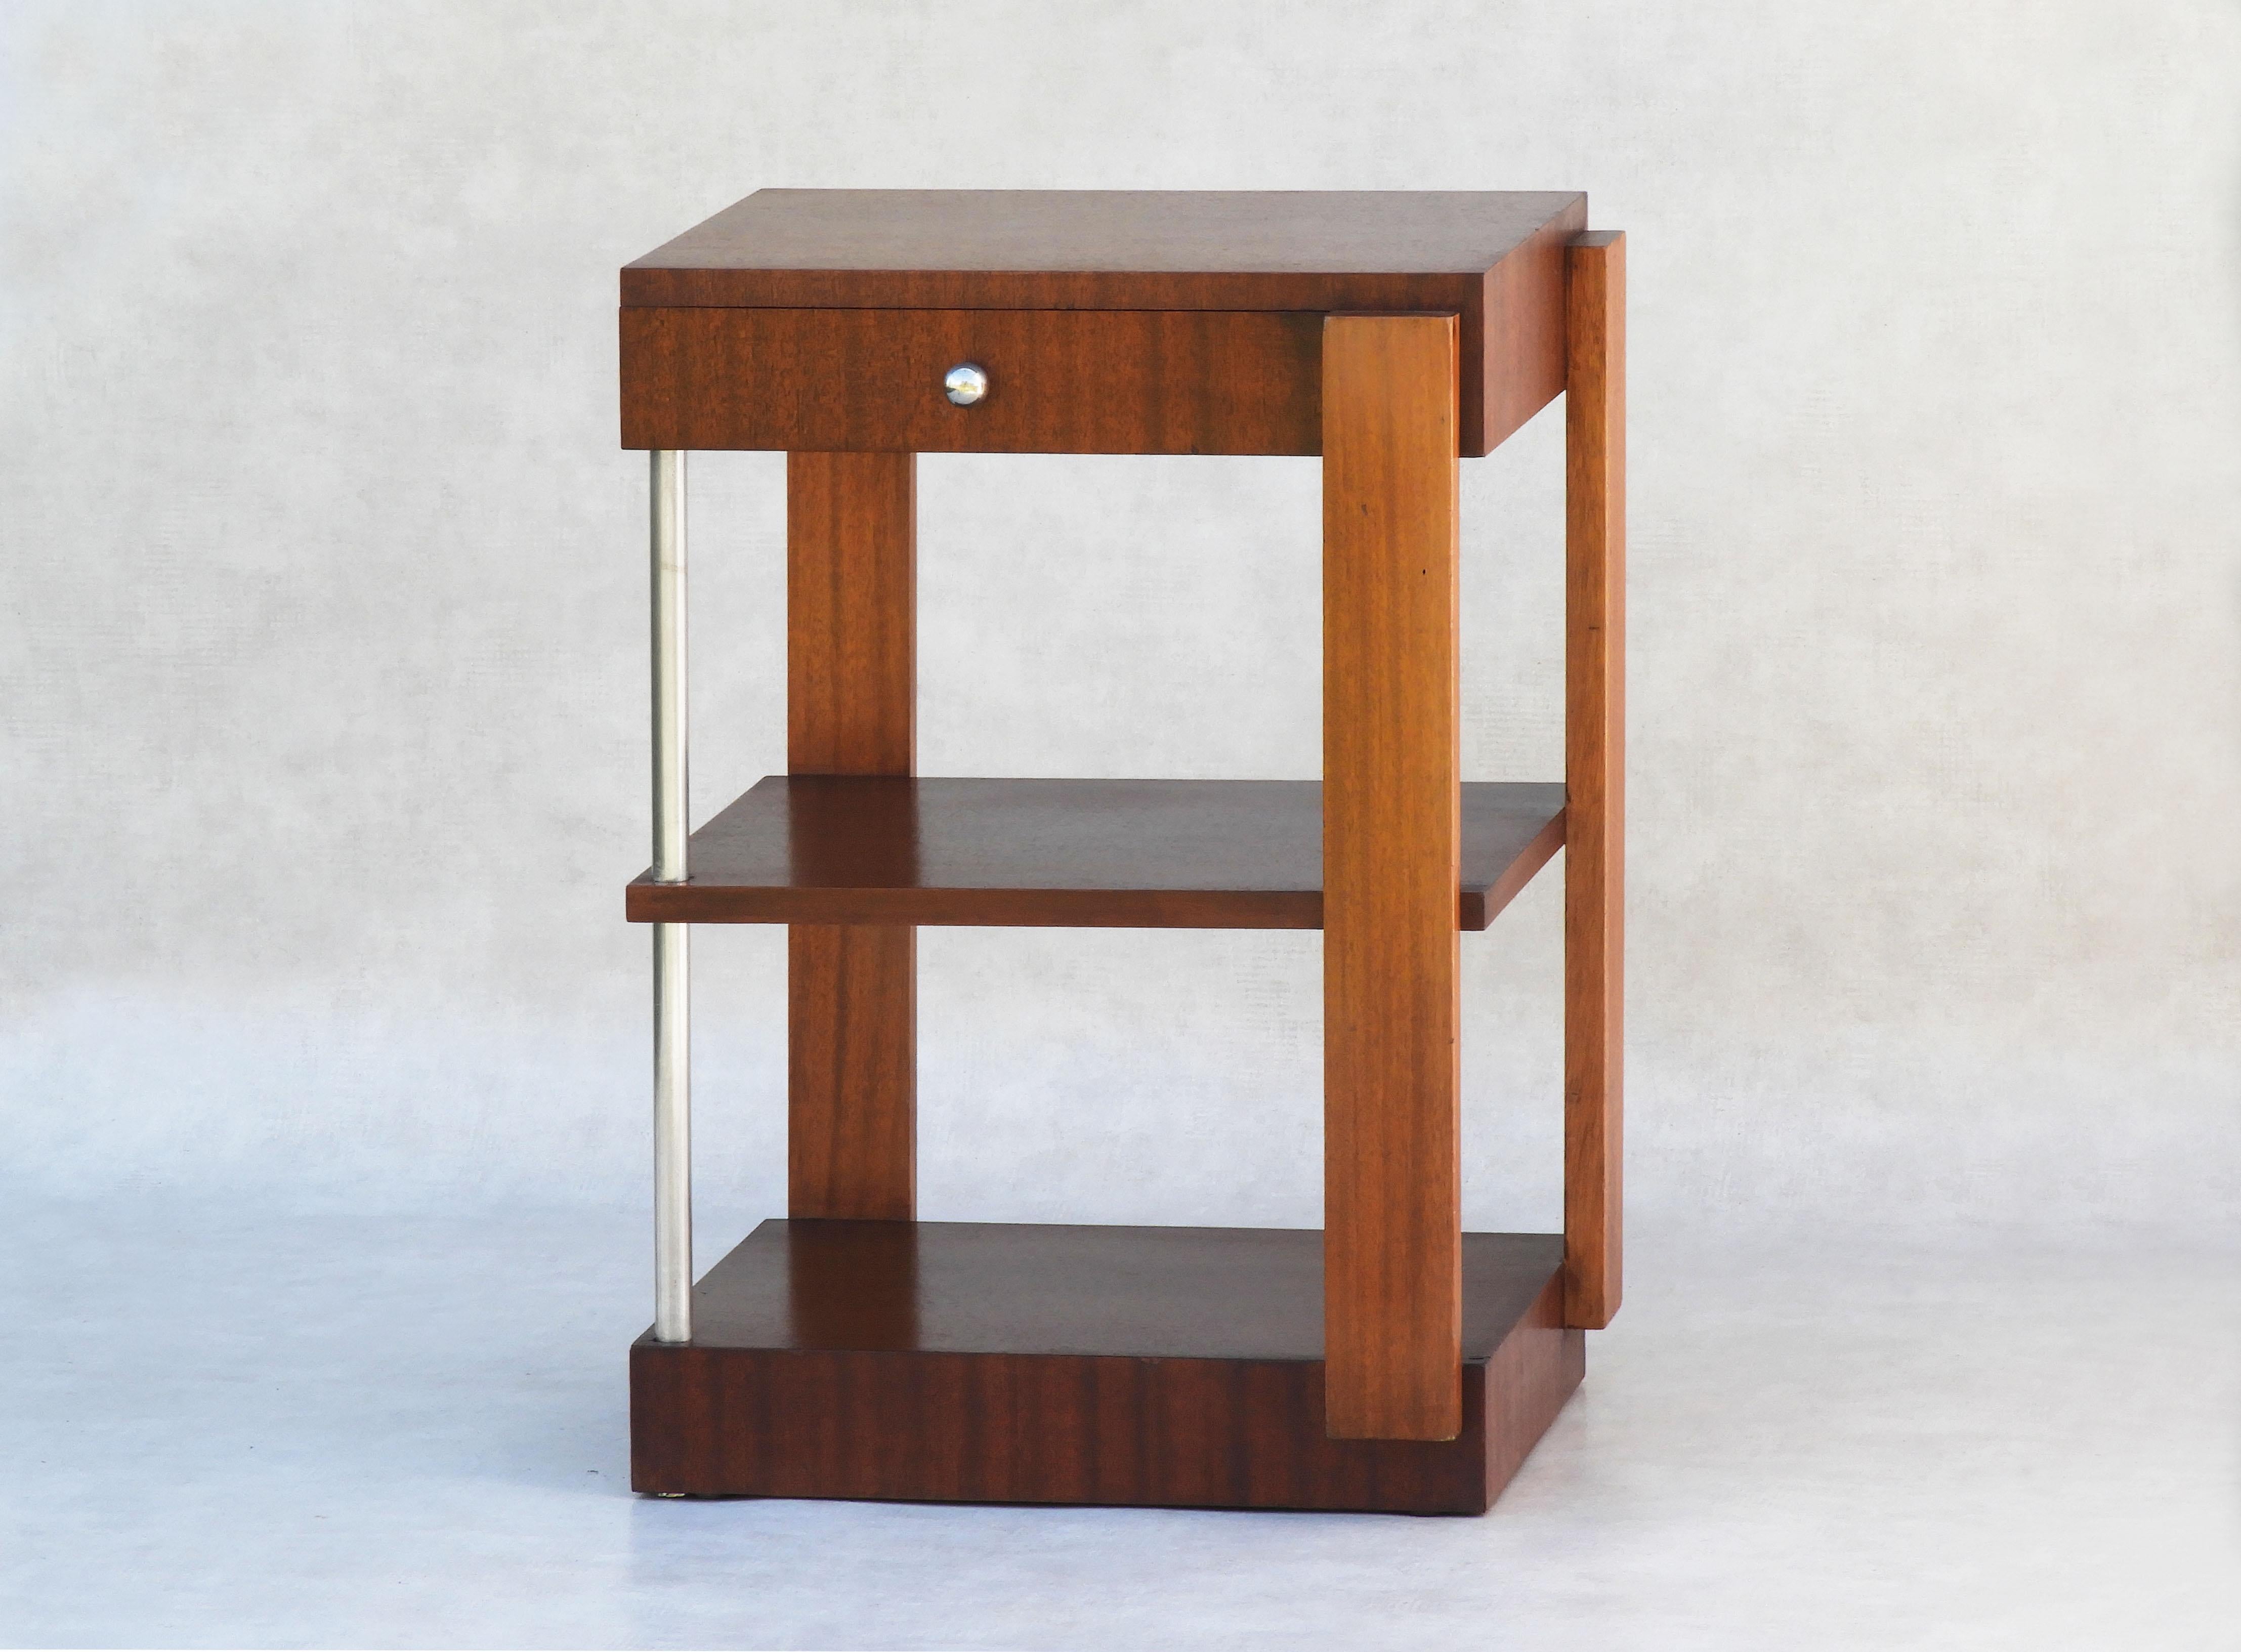 French Modernist Art Deco side table circa 1930.

A versatile three-tiered cabinet with a single drawer. Simple lines with silver hardware and a warm two-tone polished wood finish. This piece will sit easily in almost any room, finished on all